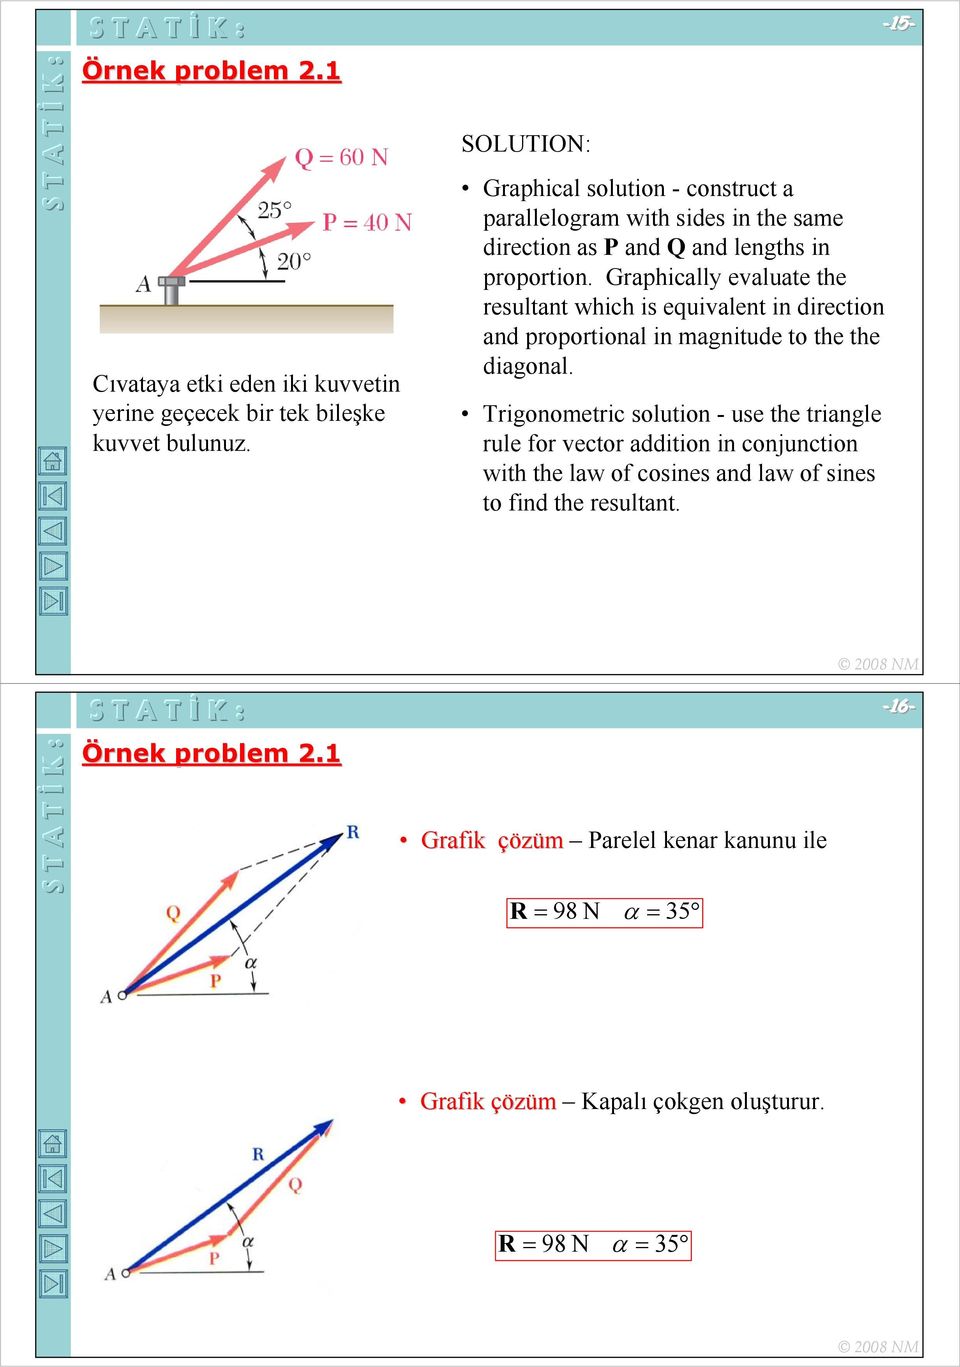 Graphicall evaluate the resultant which is equivalent in directin and prprtinal in magnitude t the the diagnal.